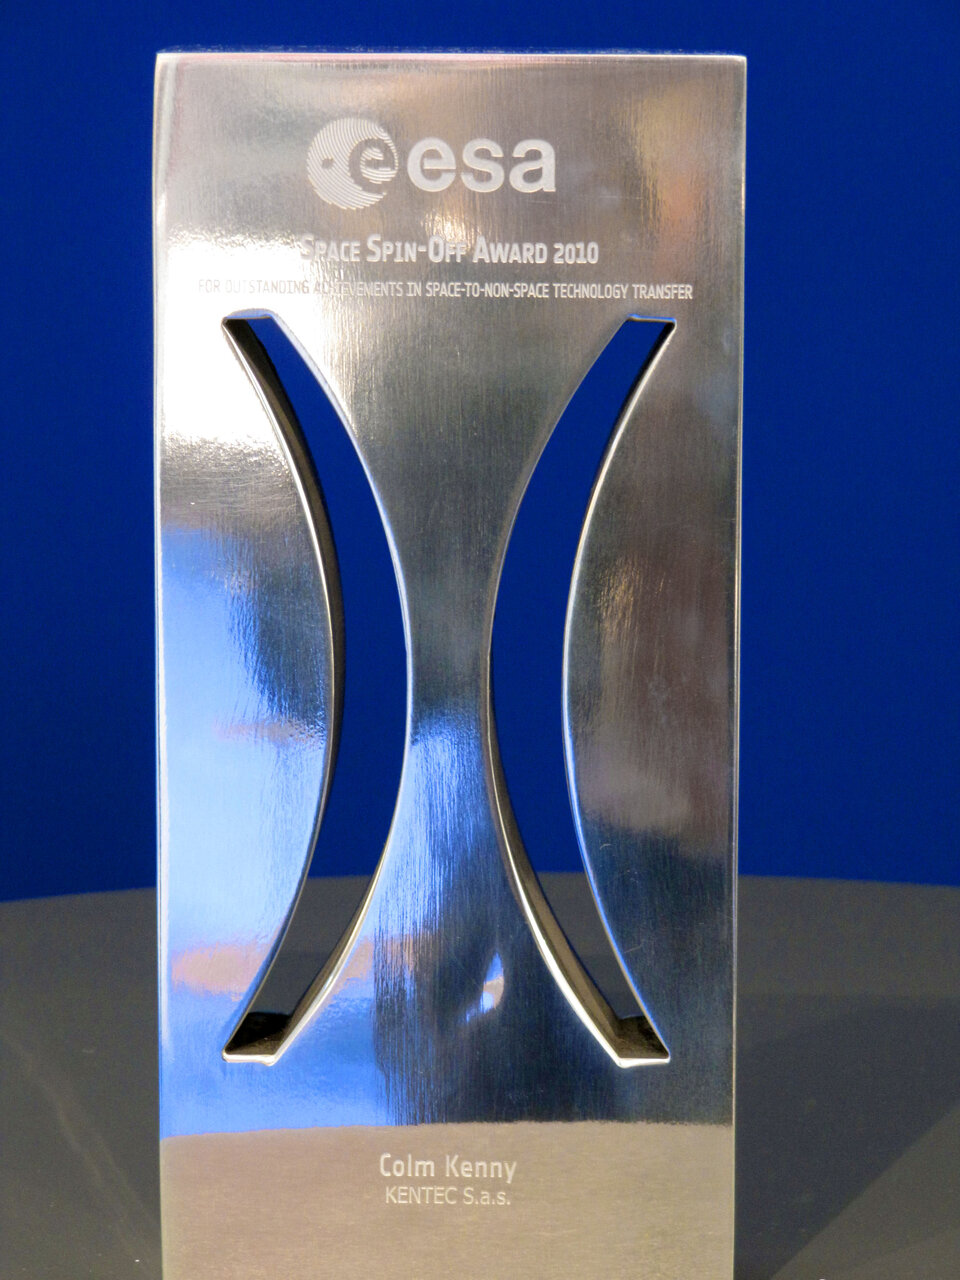 ESA's Space Spin-off Award 2010